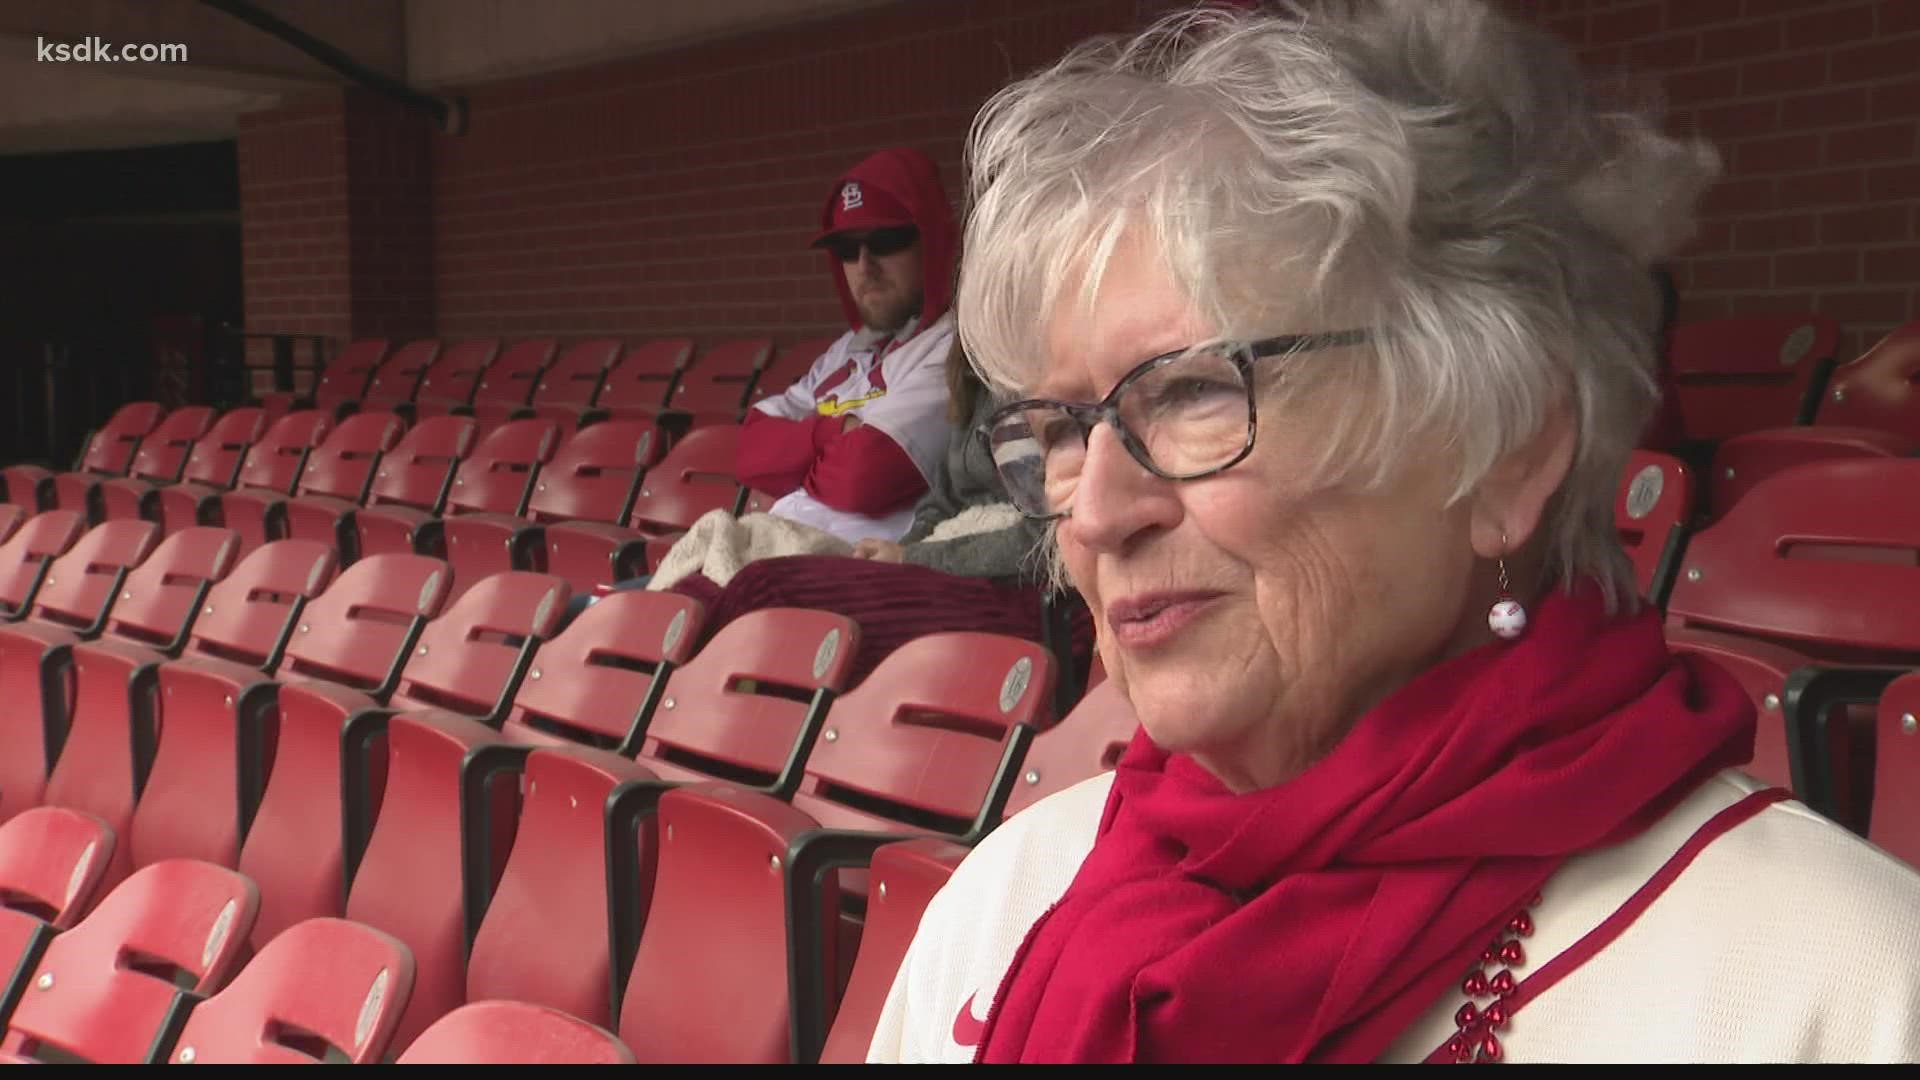 Jan Daniels was at Busch Stadium for what she calls a "holy day of obligation".